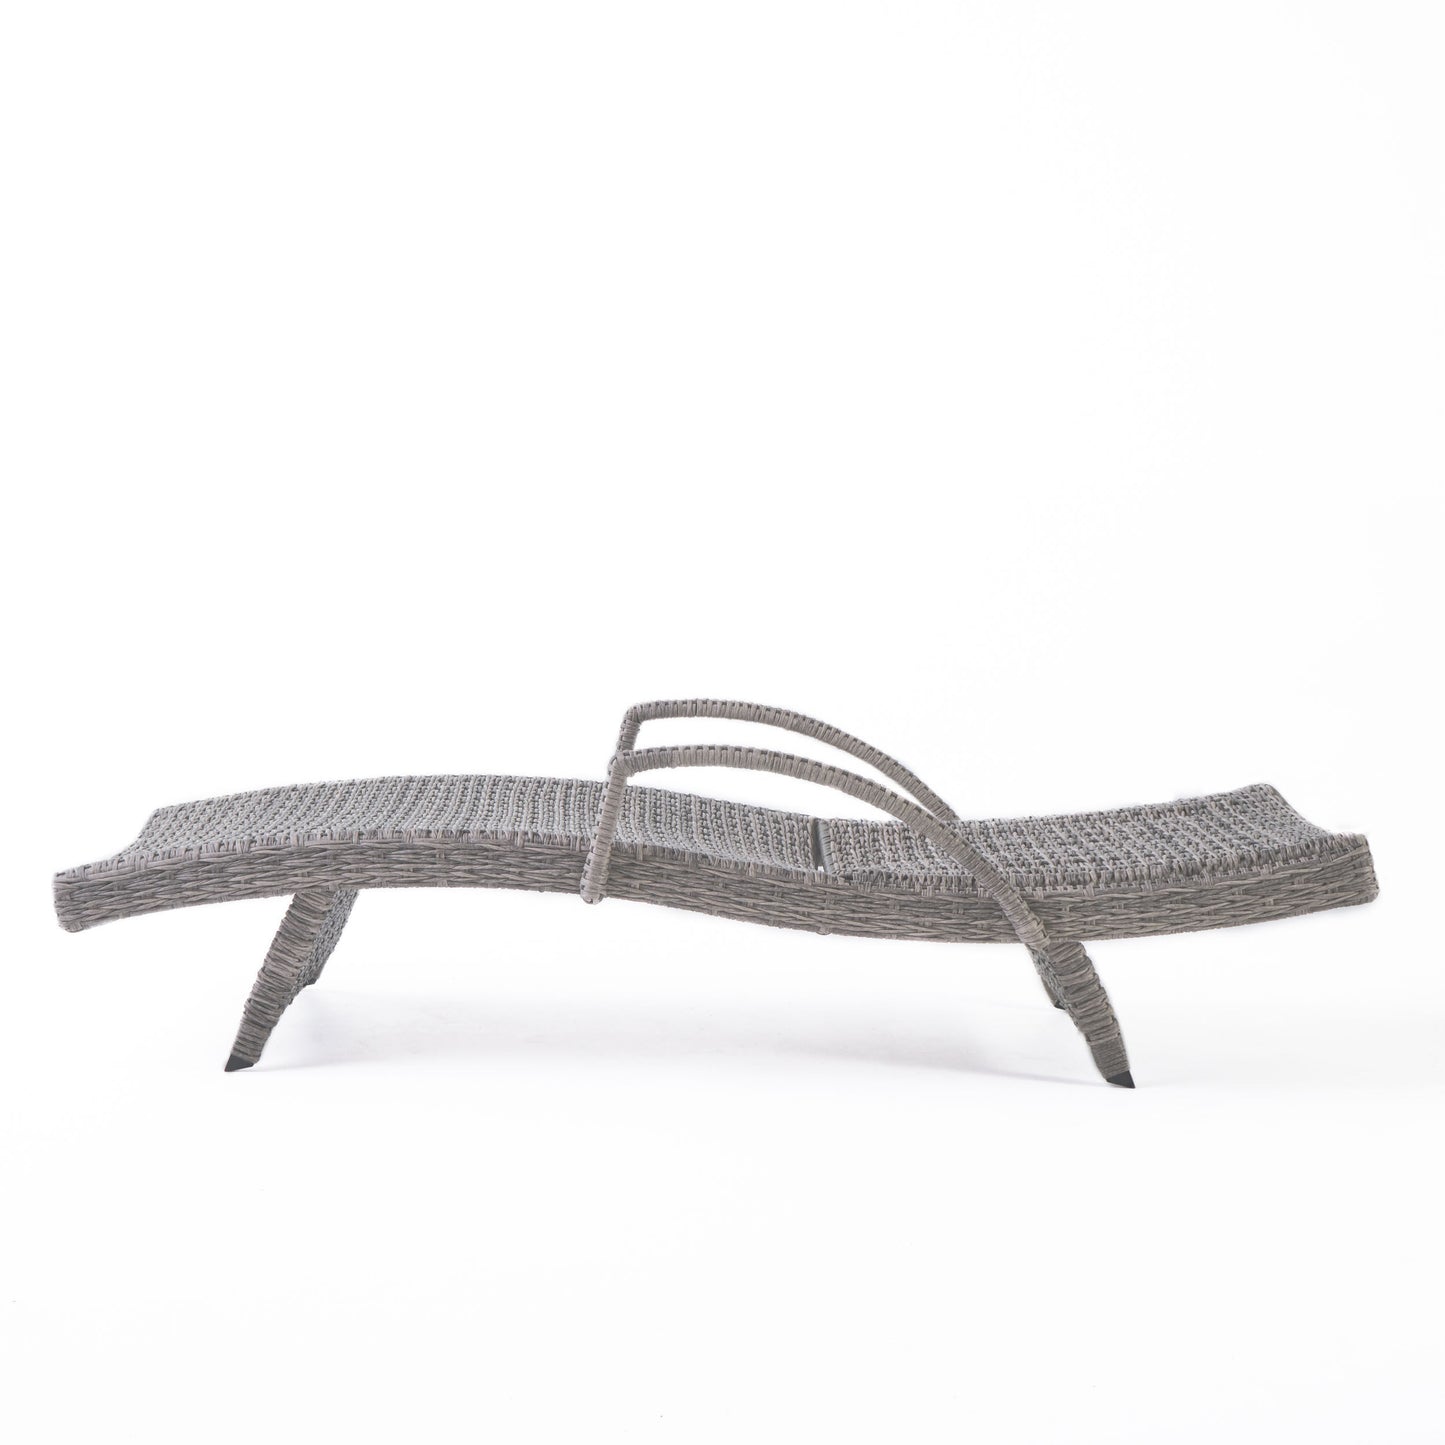 Keira Outdoor Armed Aluminum Framed Grey Wicker Chaise Lounge